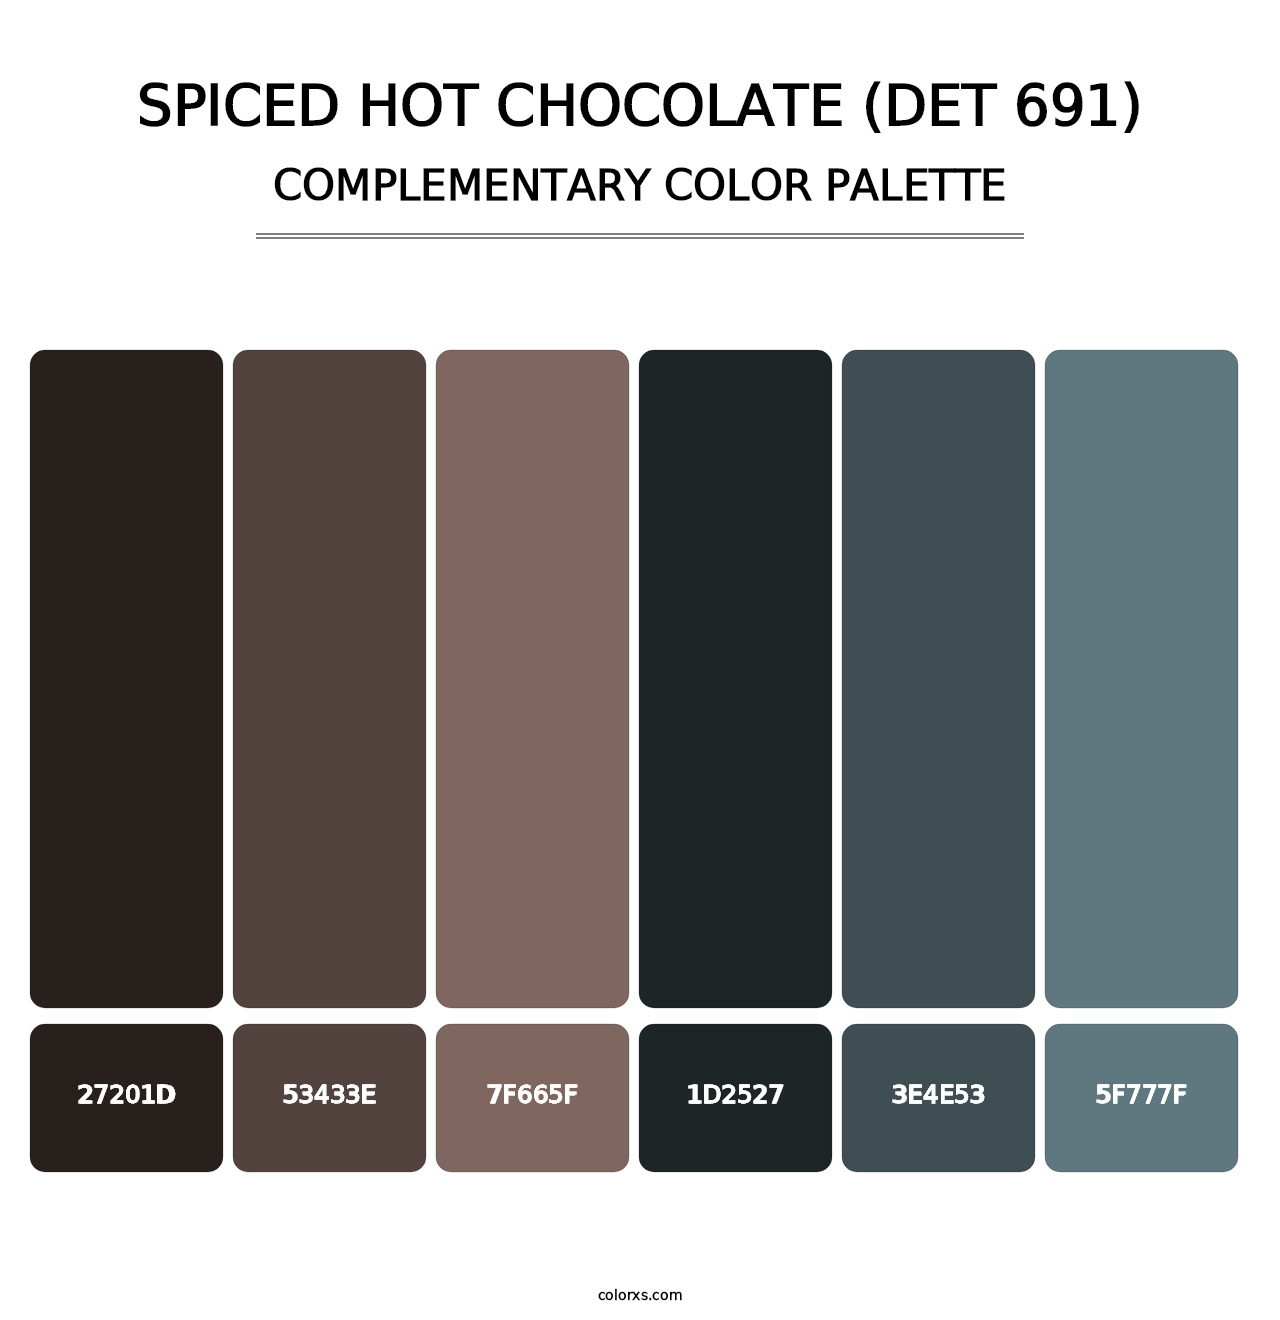 Spiced Hot Chocolate (DET 691) - Complementary Color Palette